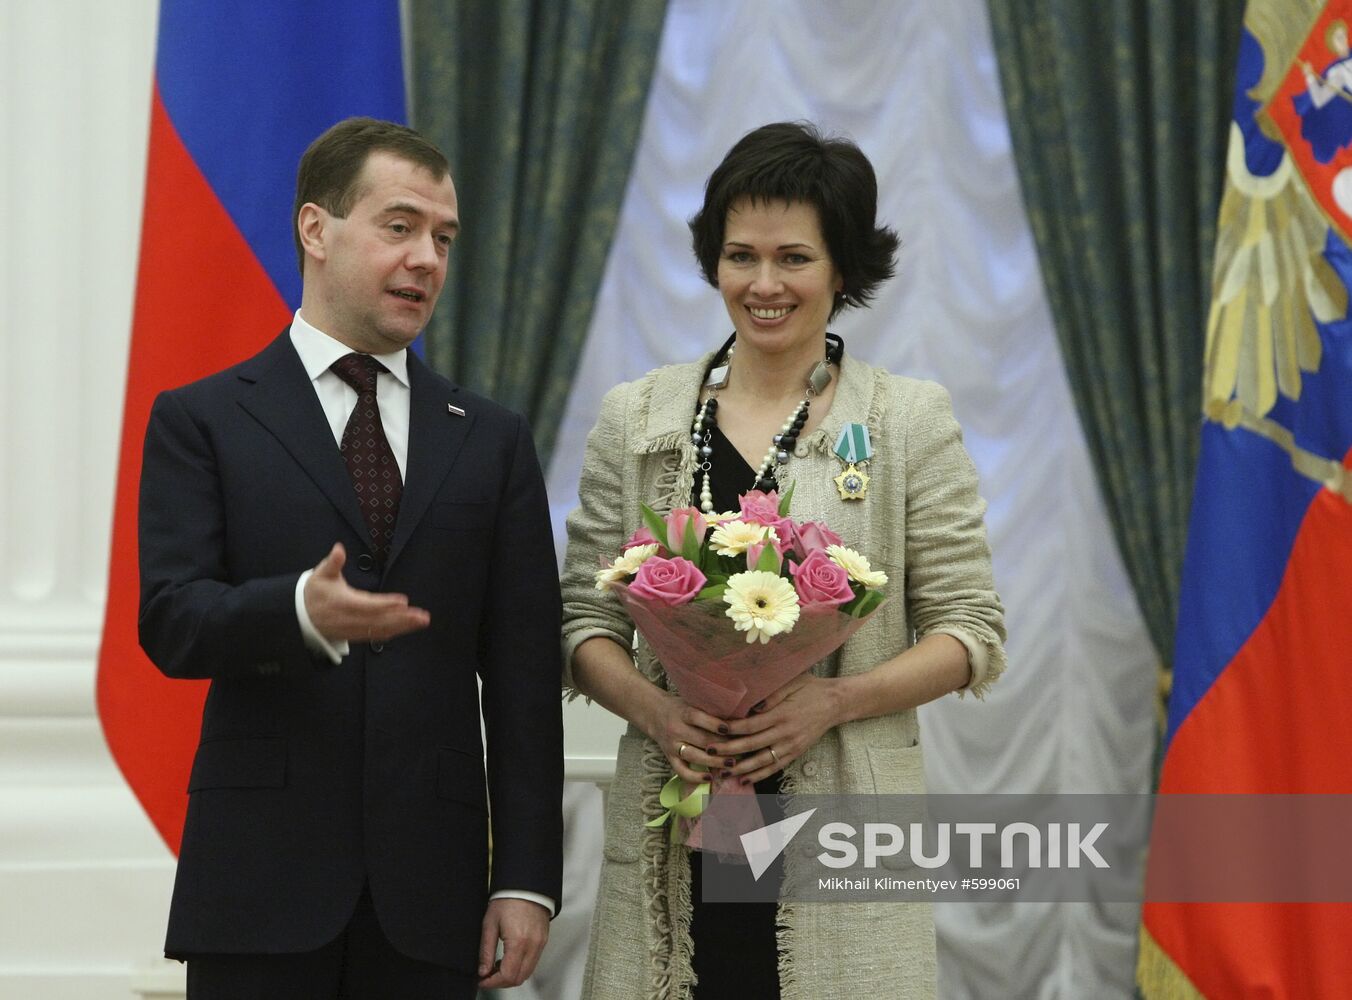 Dmitry Medvedev presents awards to Russian Olympic team